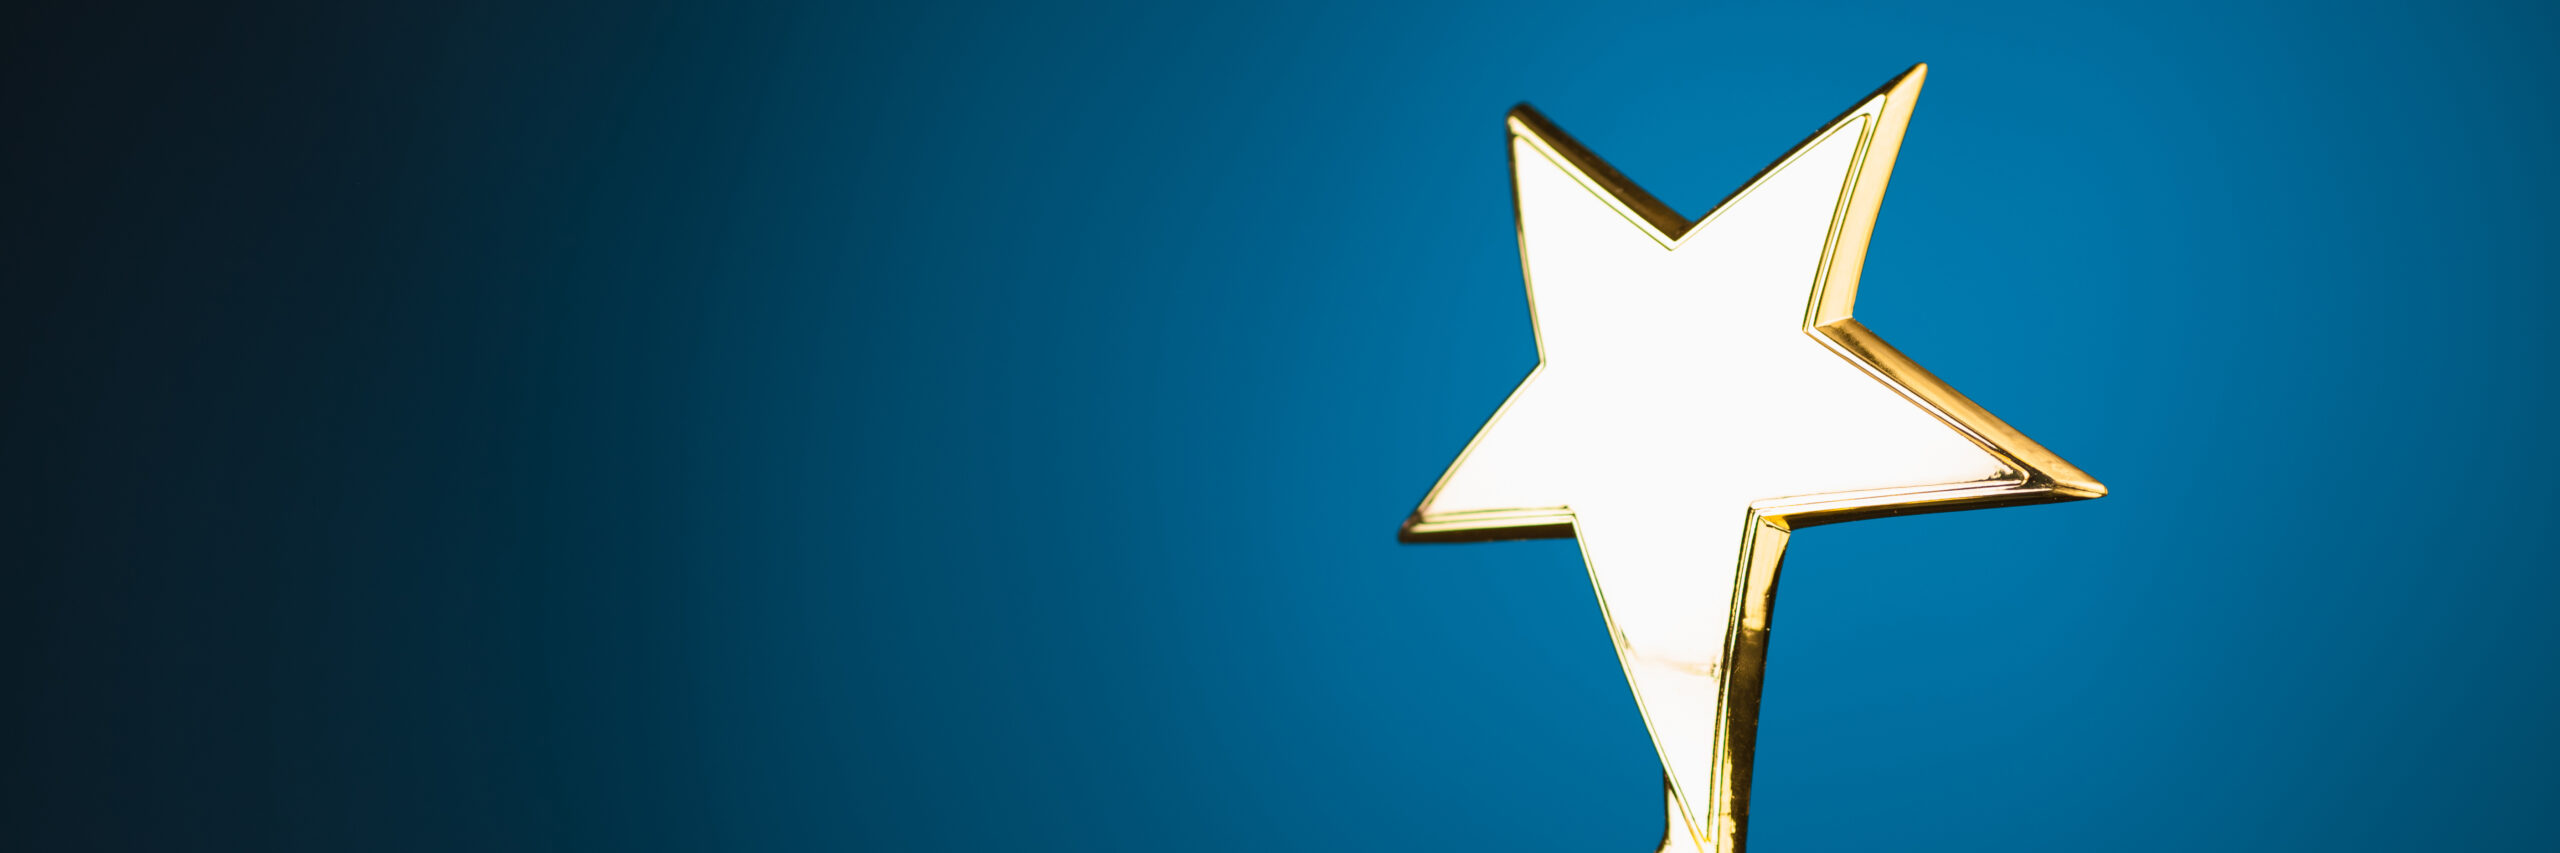 gold star award on a blue background